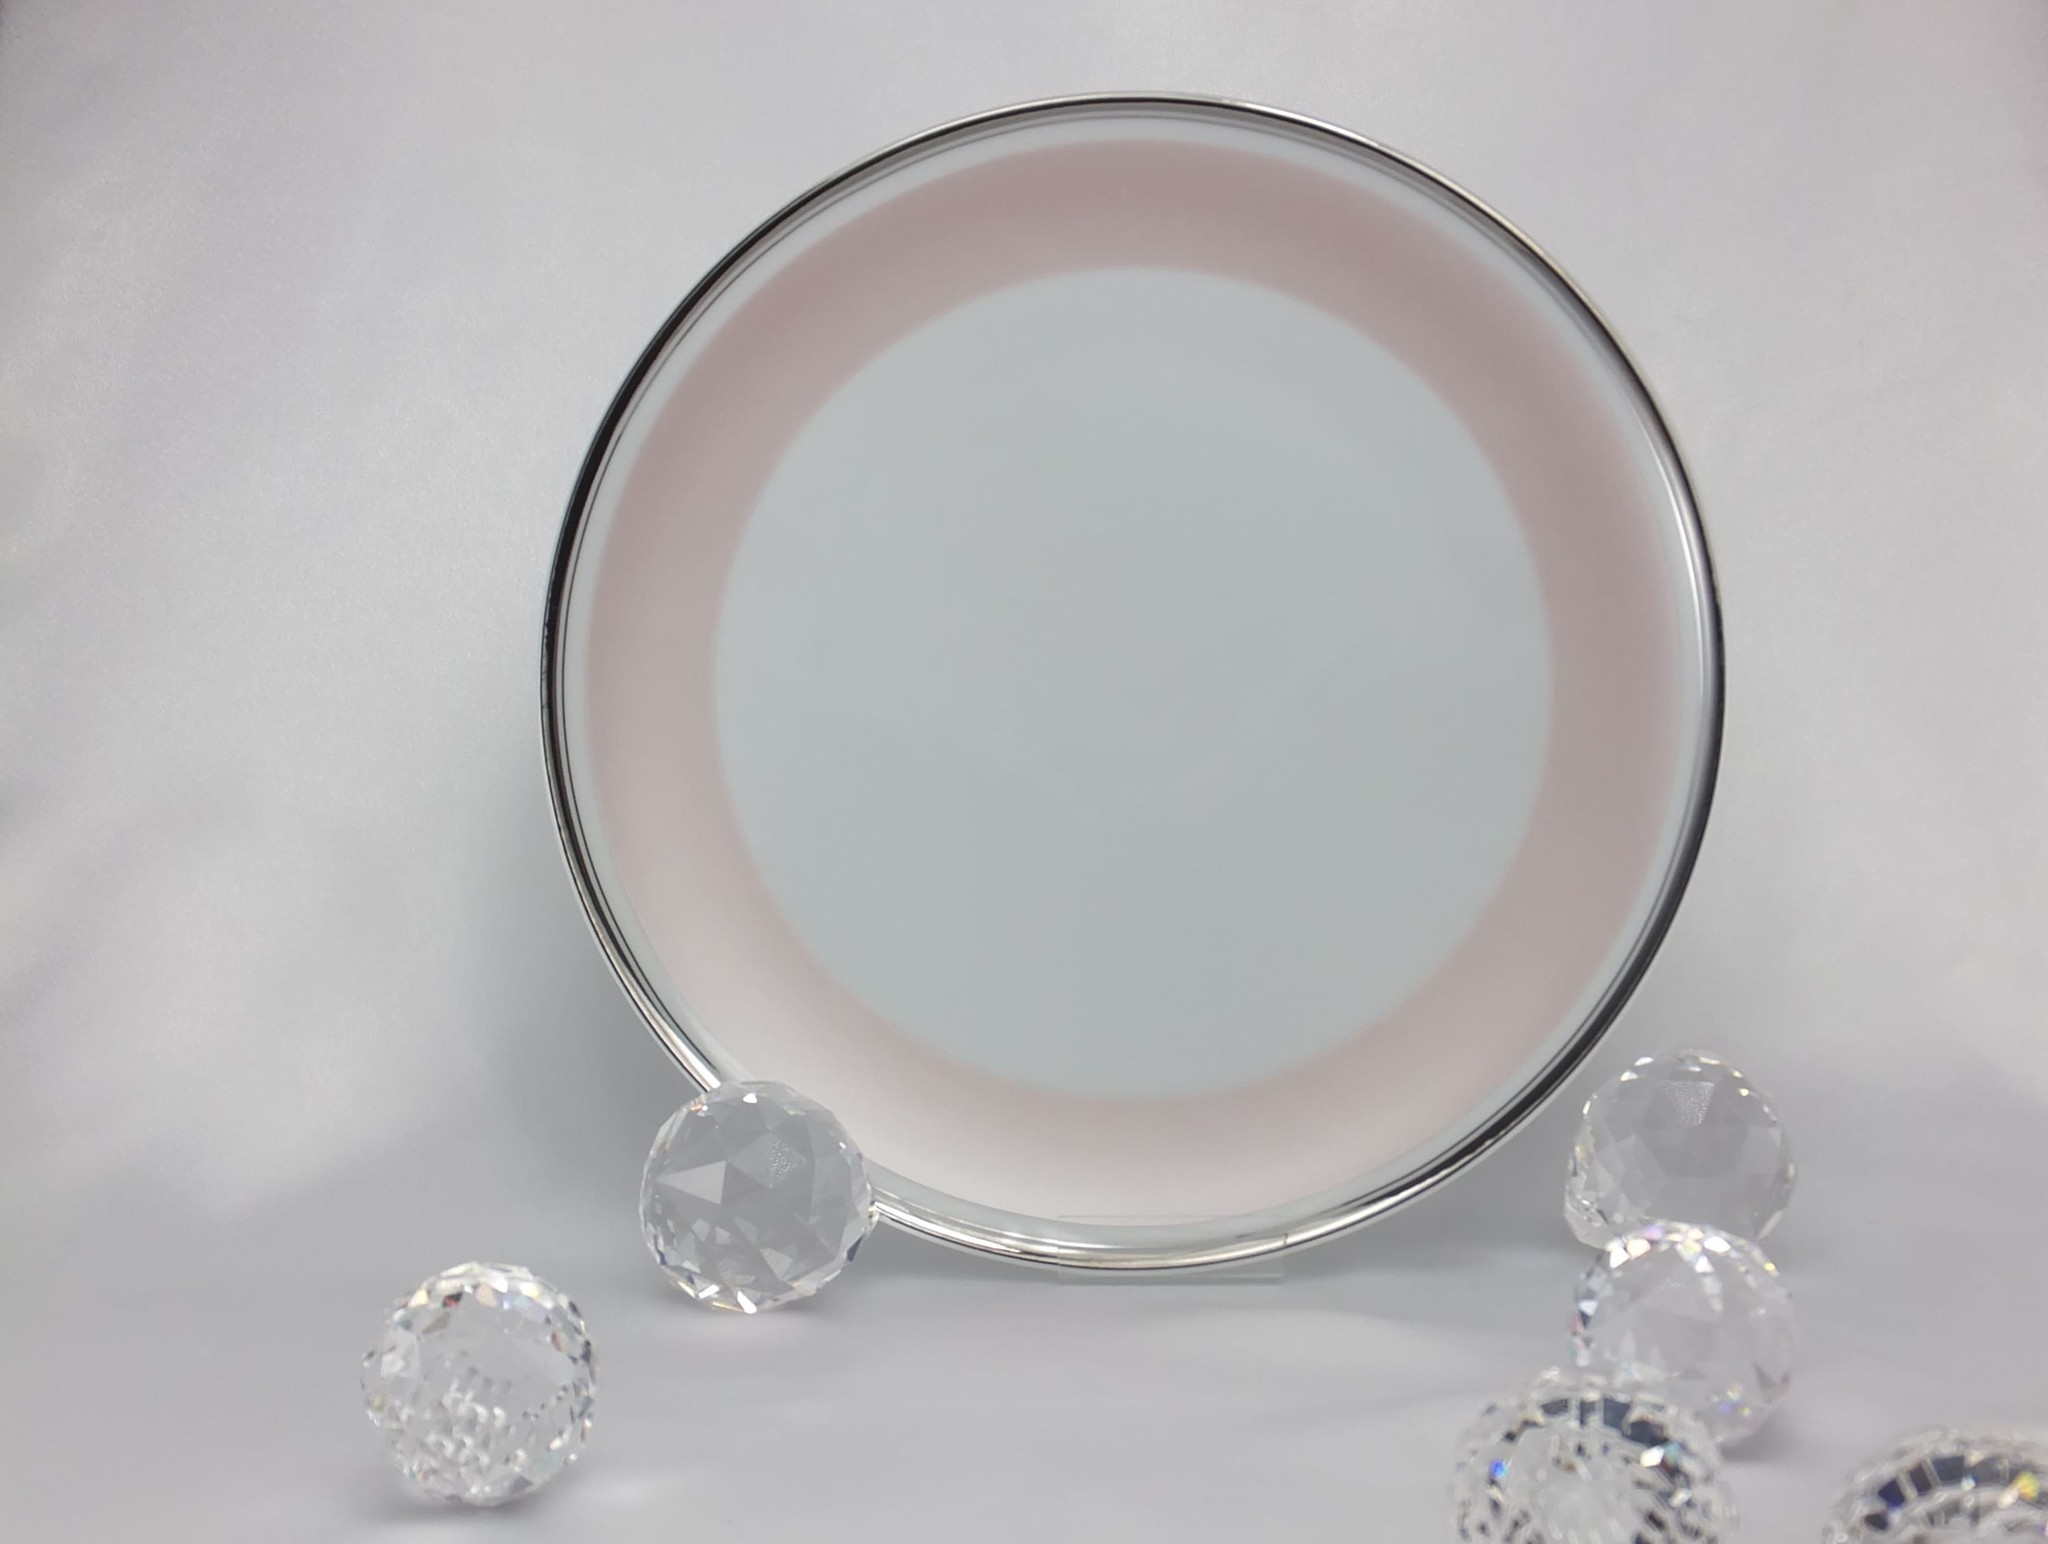 CRISTOFF -1831 Marie - Chantal - porcelain plate in rose tone